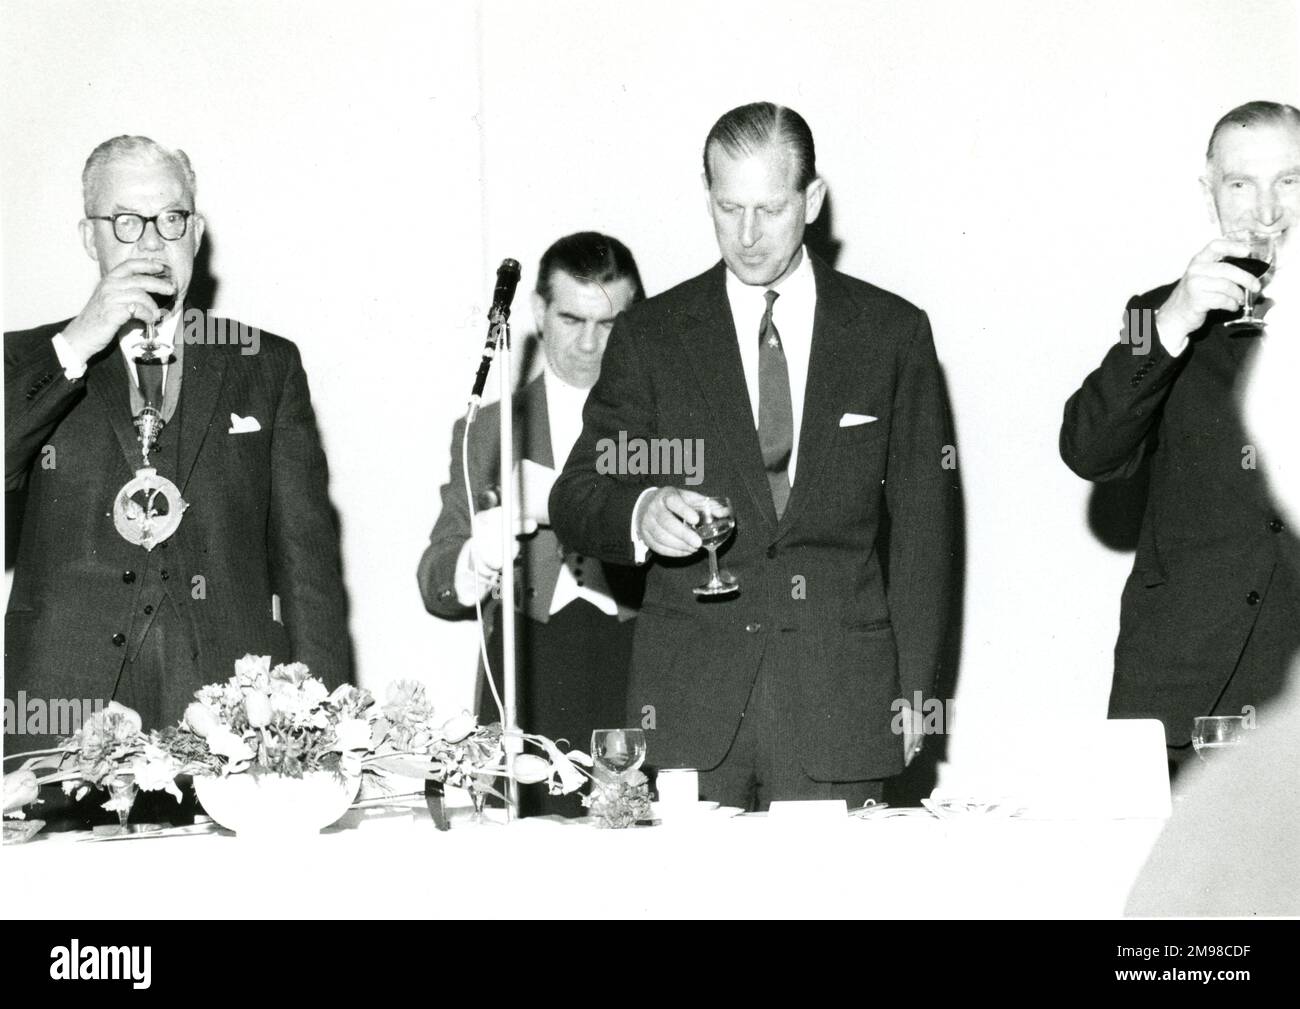 HRH The Prince Philip, Duke of Edinburgh, Honorary President, Royal Aeronautical Society, proposes the toast at the Luncheon given by the President and Council on 5 May 1966 at the Europa Hotel, London. From left: Sir George Gardner, RAeS President 1965-1966, The Duke of Edinburgh and A.D. Baxter, RAeS President 1966-1967. Stock Photo